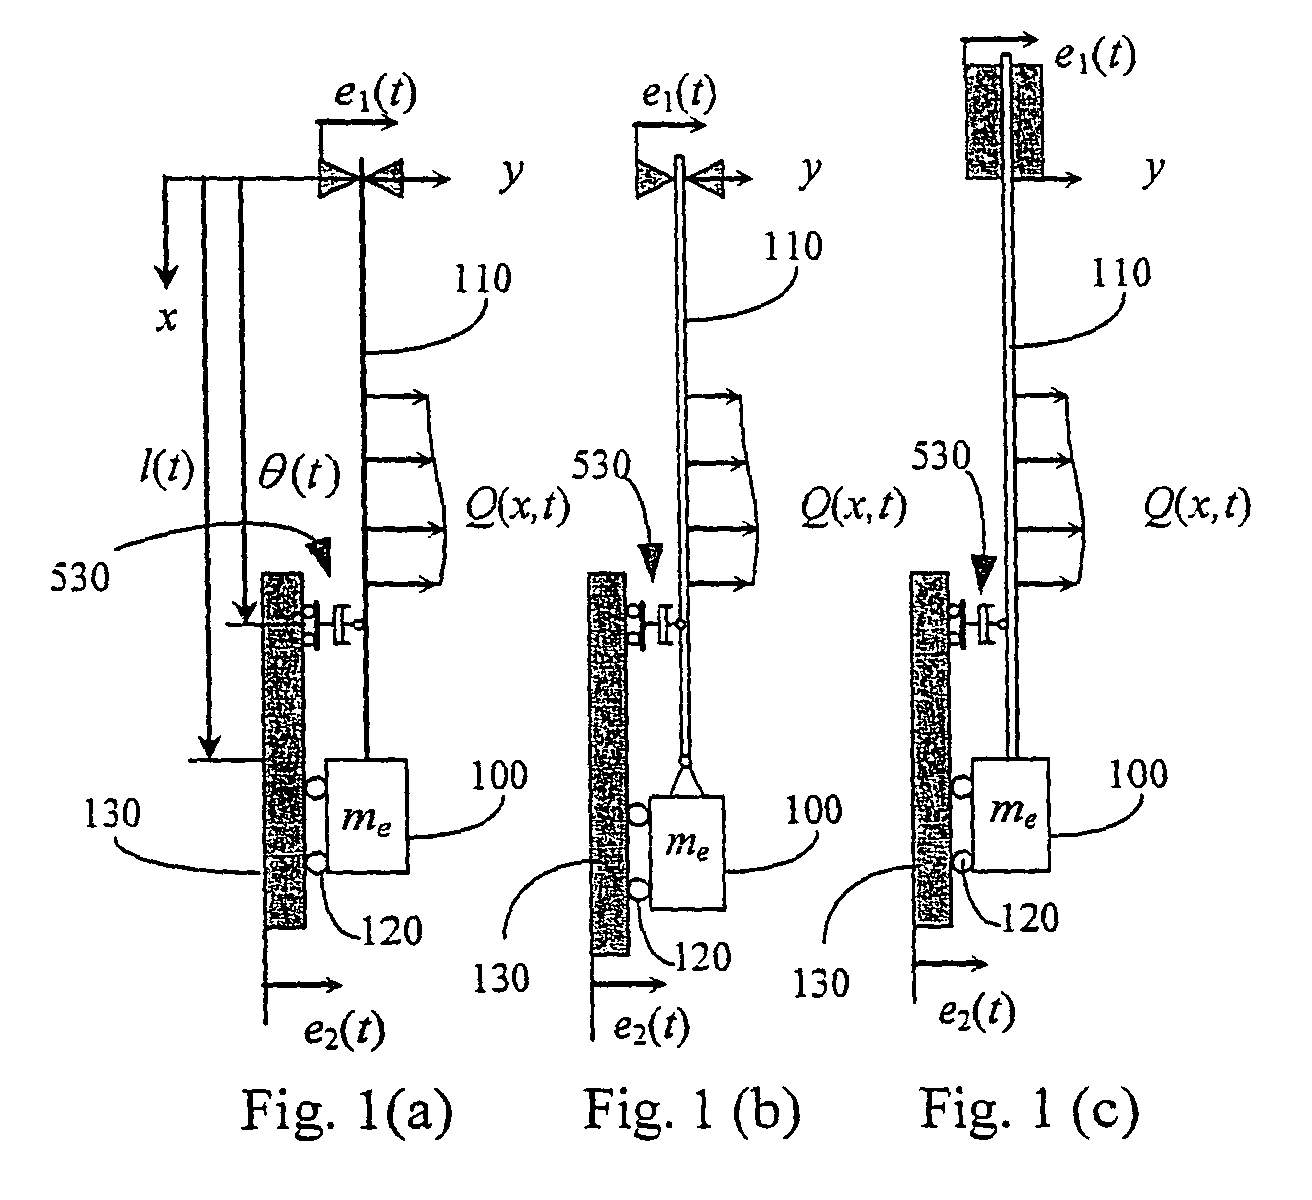 System and method for damping vibrations in elevator cables